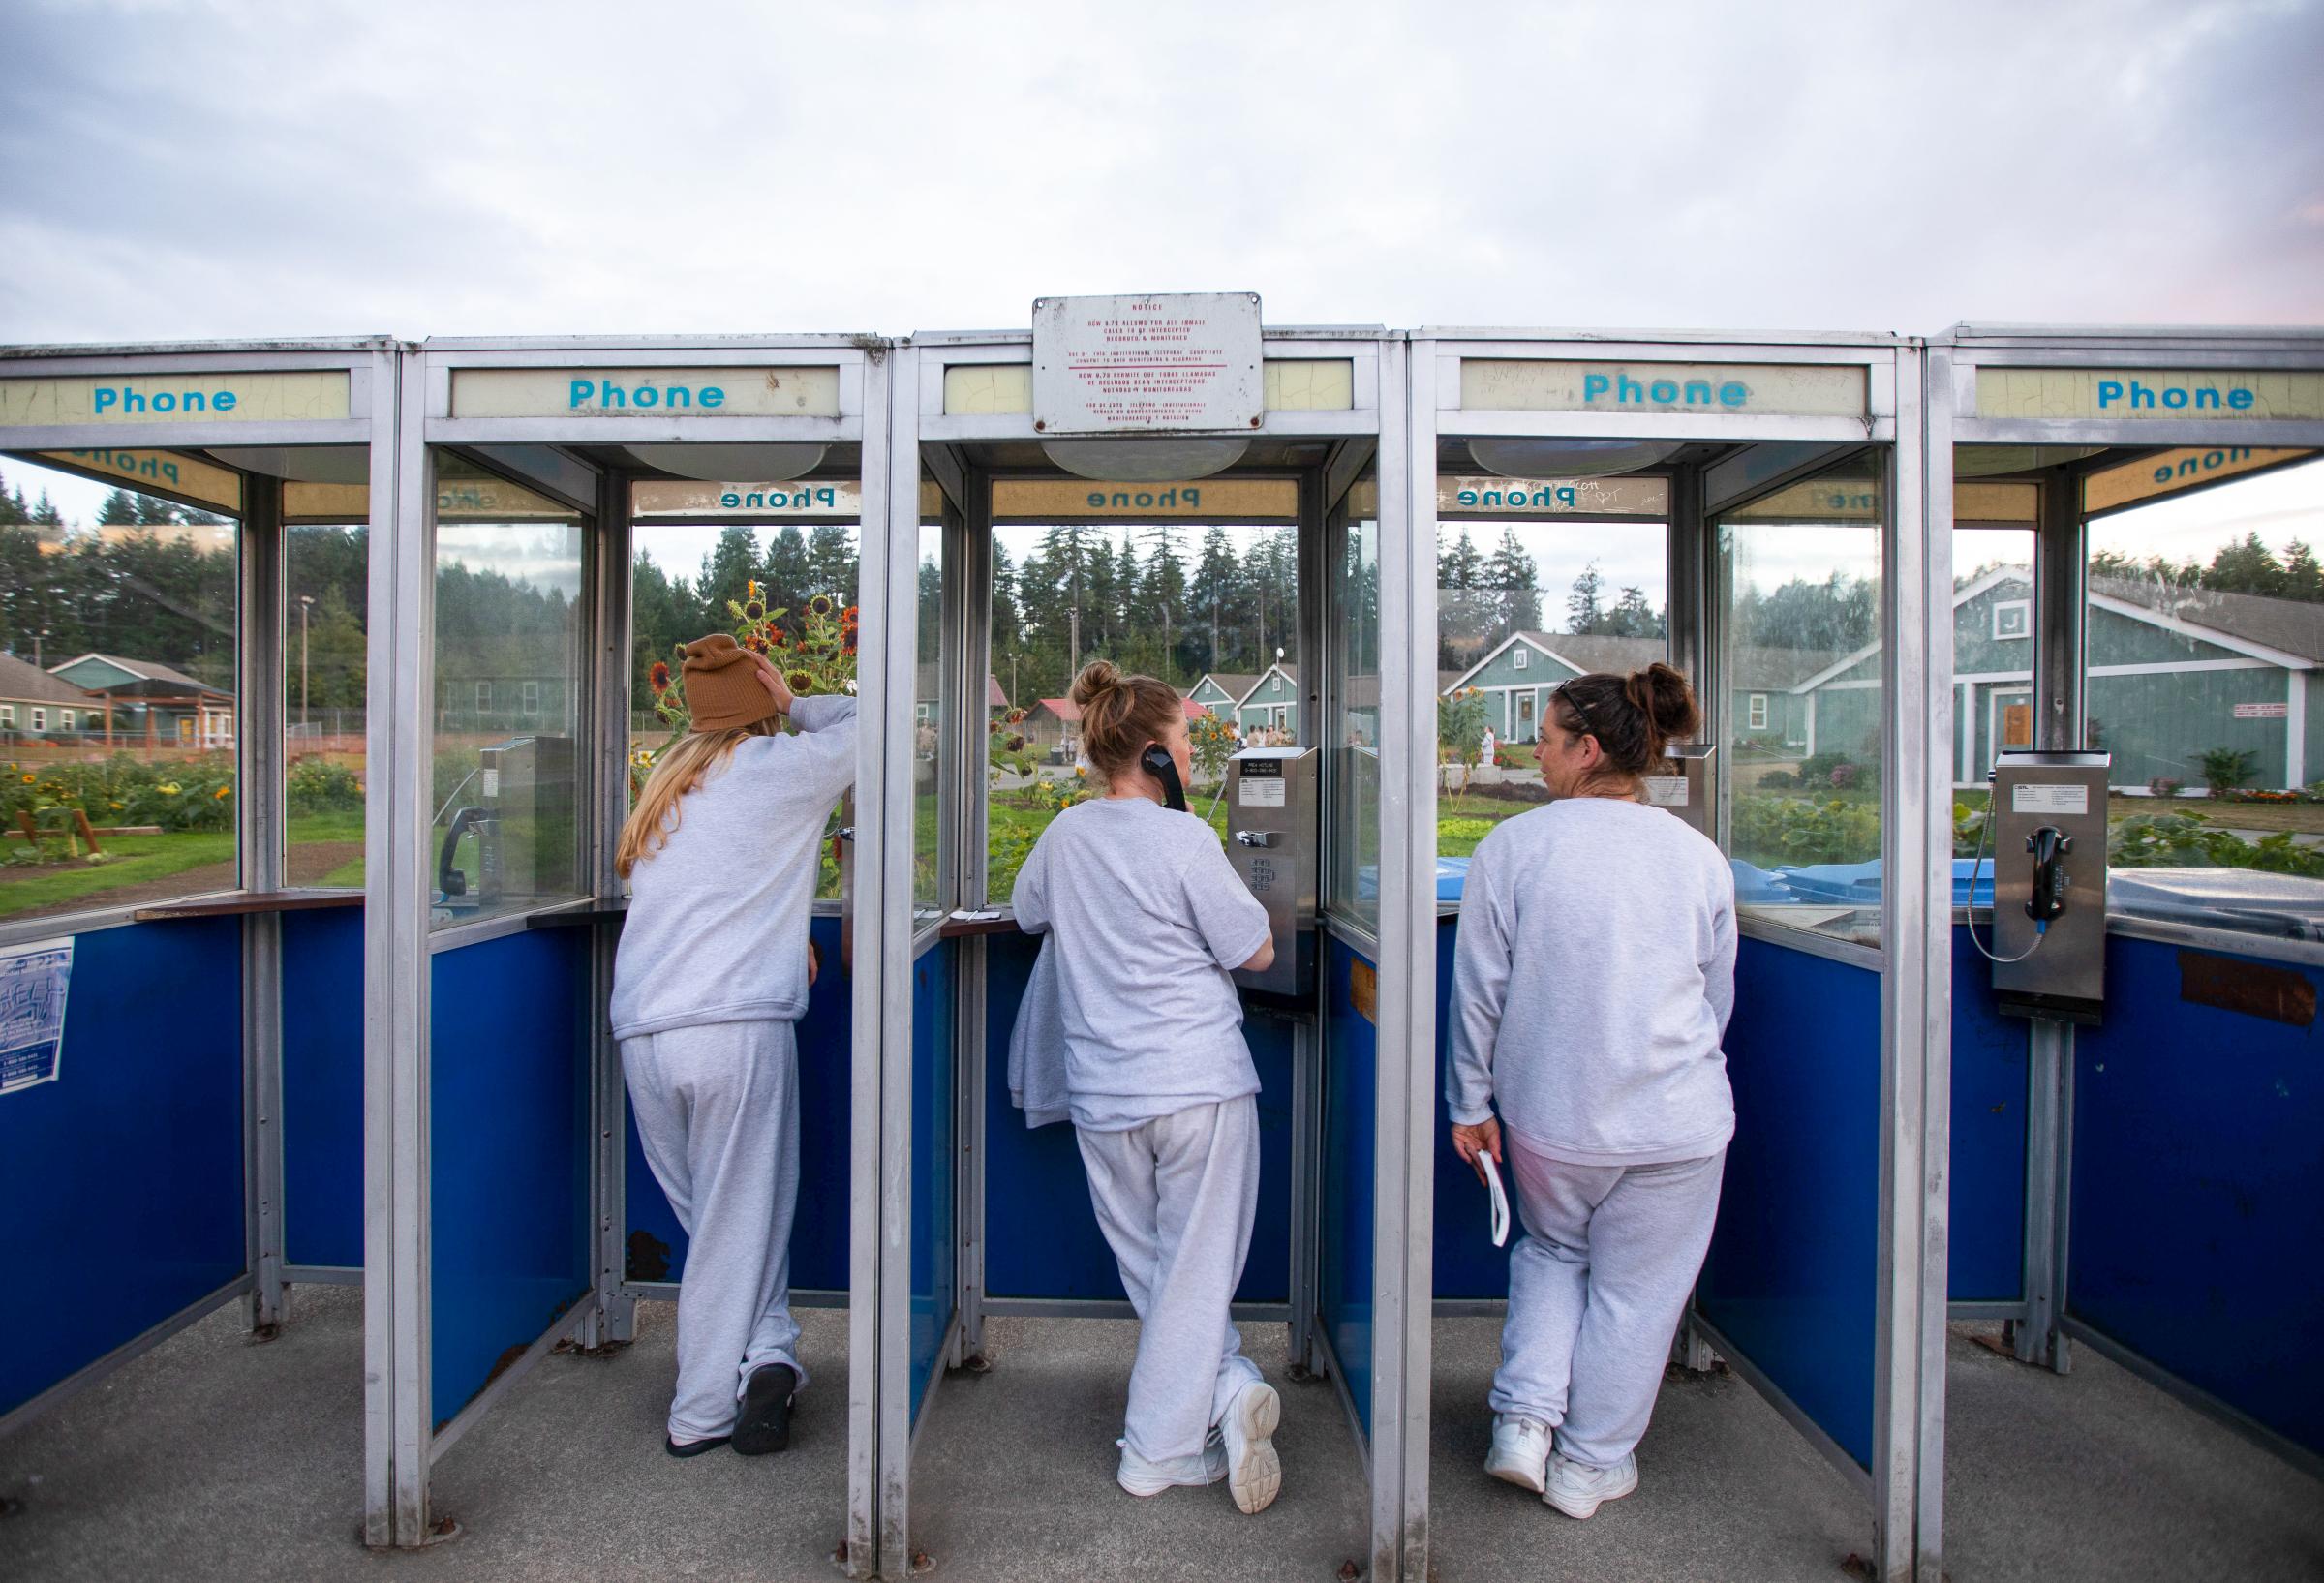 Inmates using the payphone booth outside the Women&#39;s residential parenting building at...